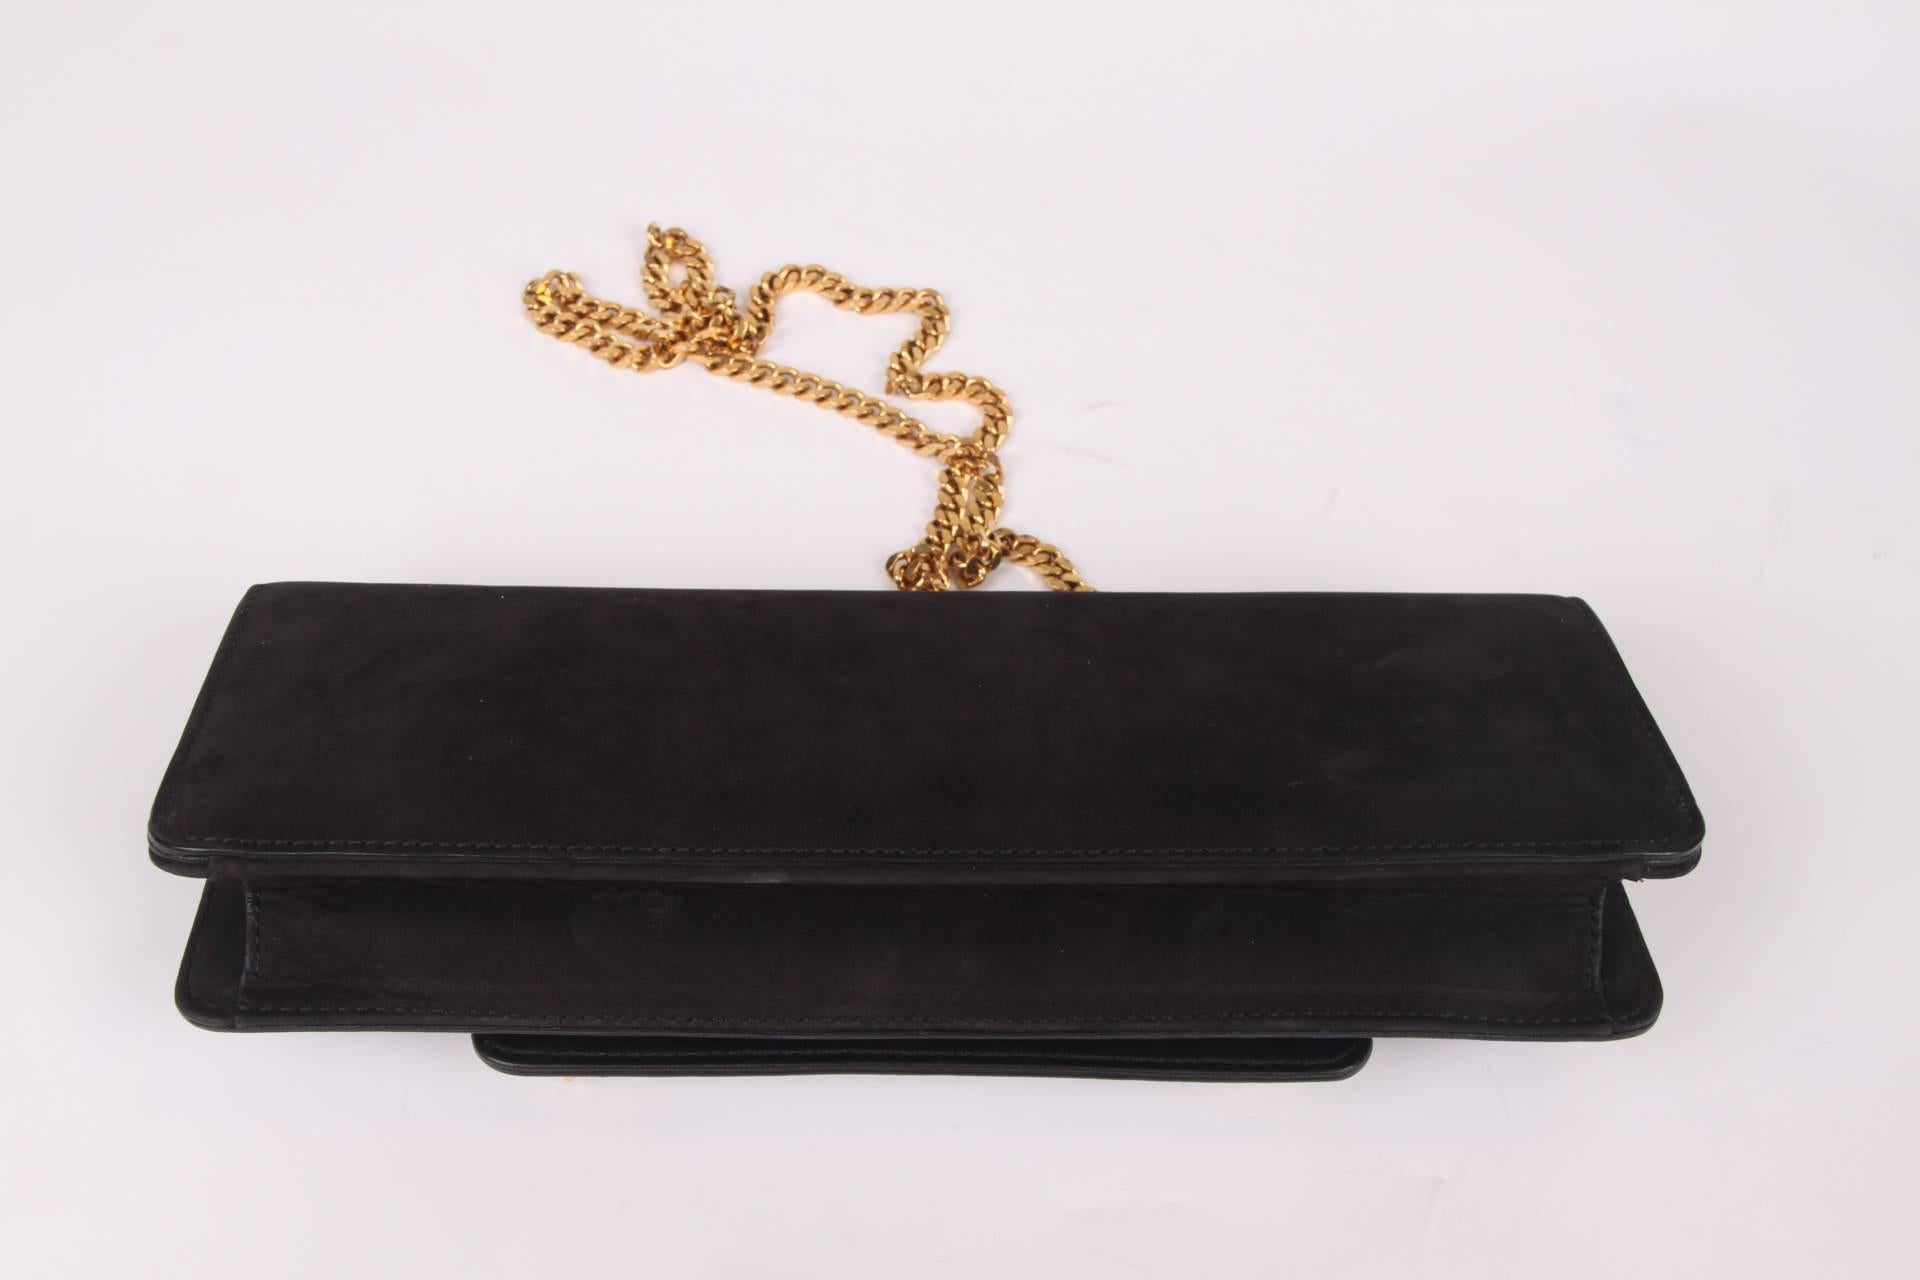 From the Tigrette collection by Gucci; a black nubuck leather clutch bag. Fancy!

This bag is rectangular, has a detachable gold-tone chain shoulder strap and flap closure with two black and white enamel tiger heads. The eyes have red crystal